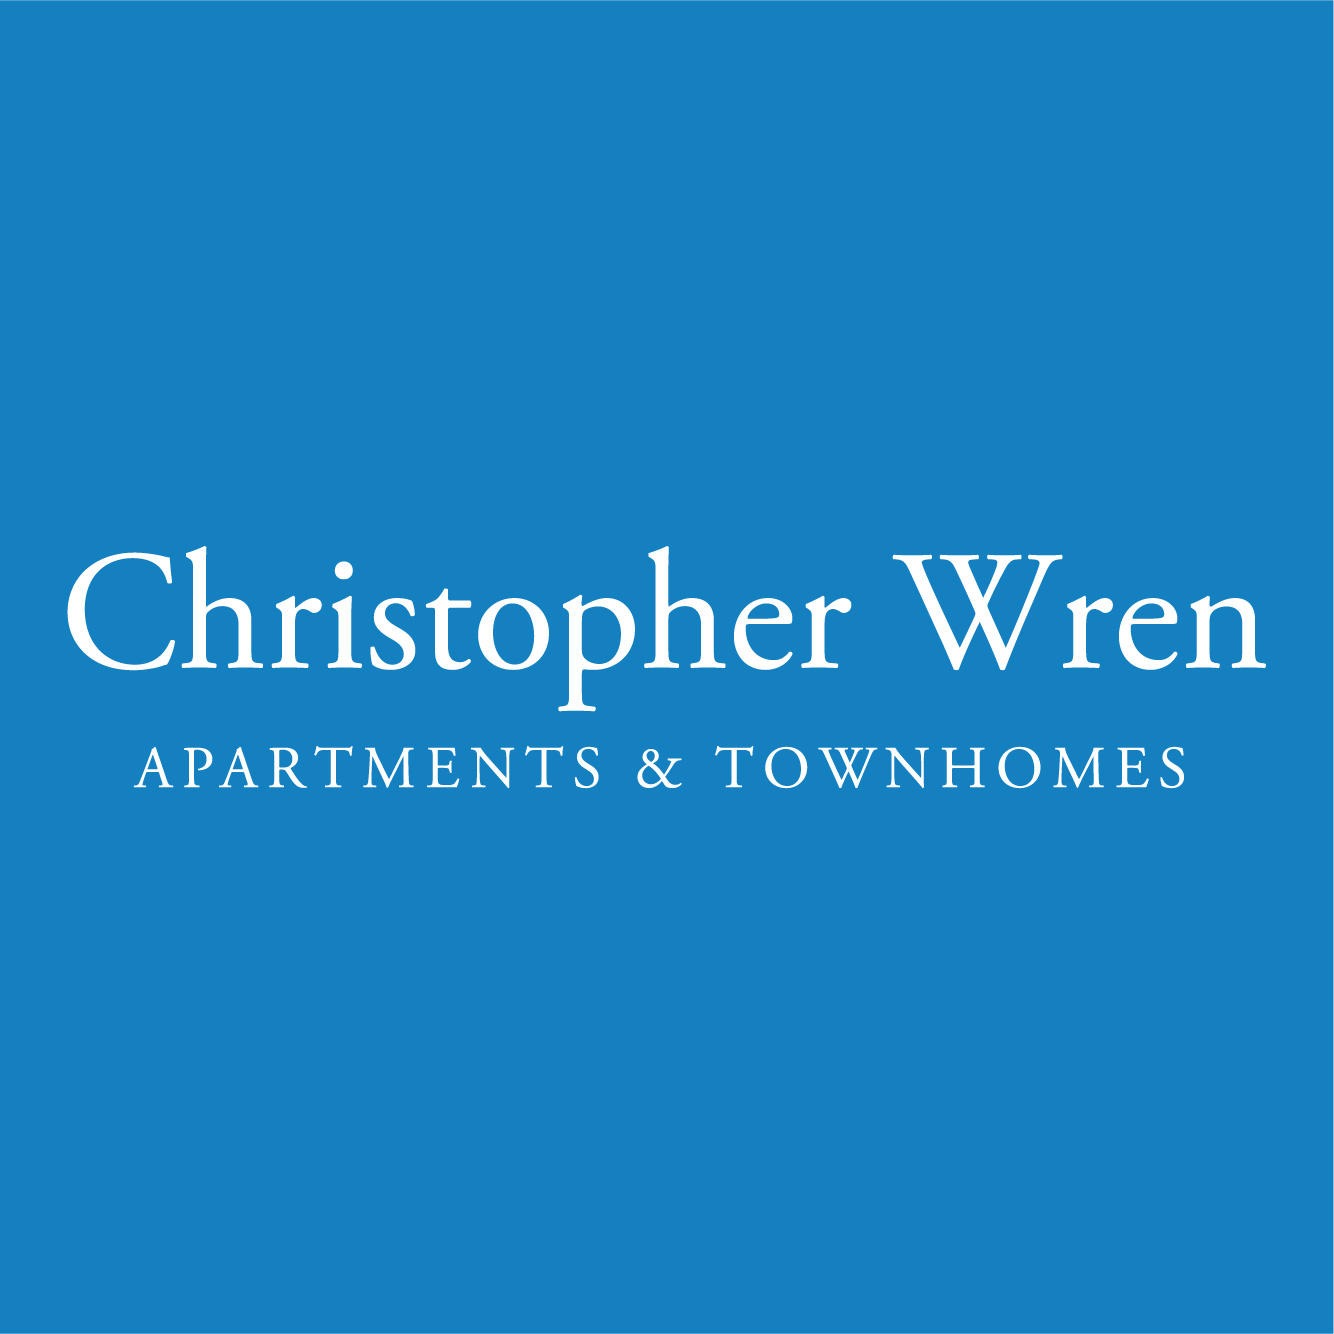 Christopher Wren Apartments & Townhomes